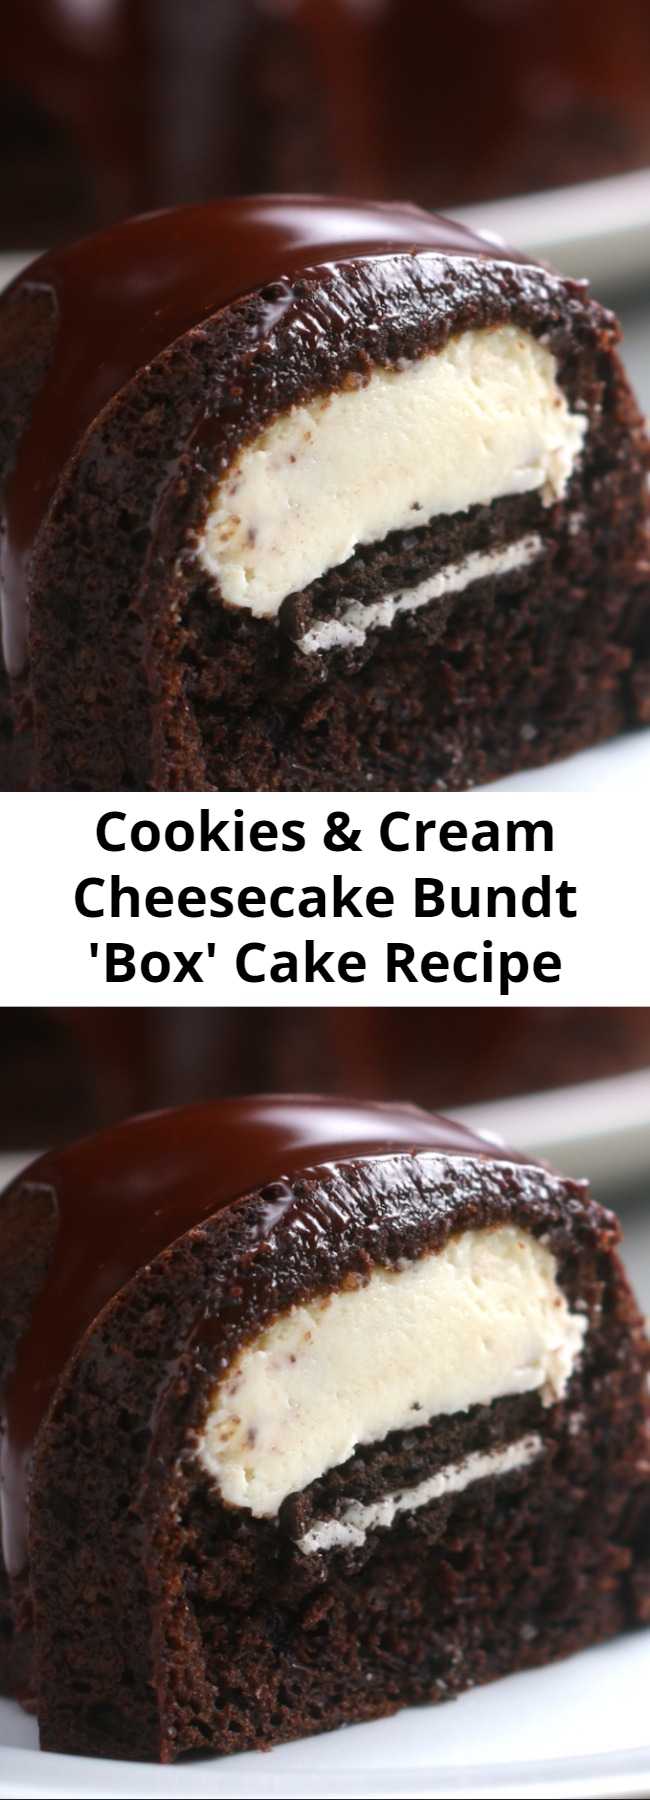 Cookies & Cream Cheesecake Bundt 'Box' Cake Recipe - Who could beat this Cheesecake Filled Chocolate Bundt Cake with its rich yet tender chocolate cake, surprise cheesecake filling, and thick fudgy glaze? YUM.